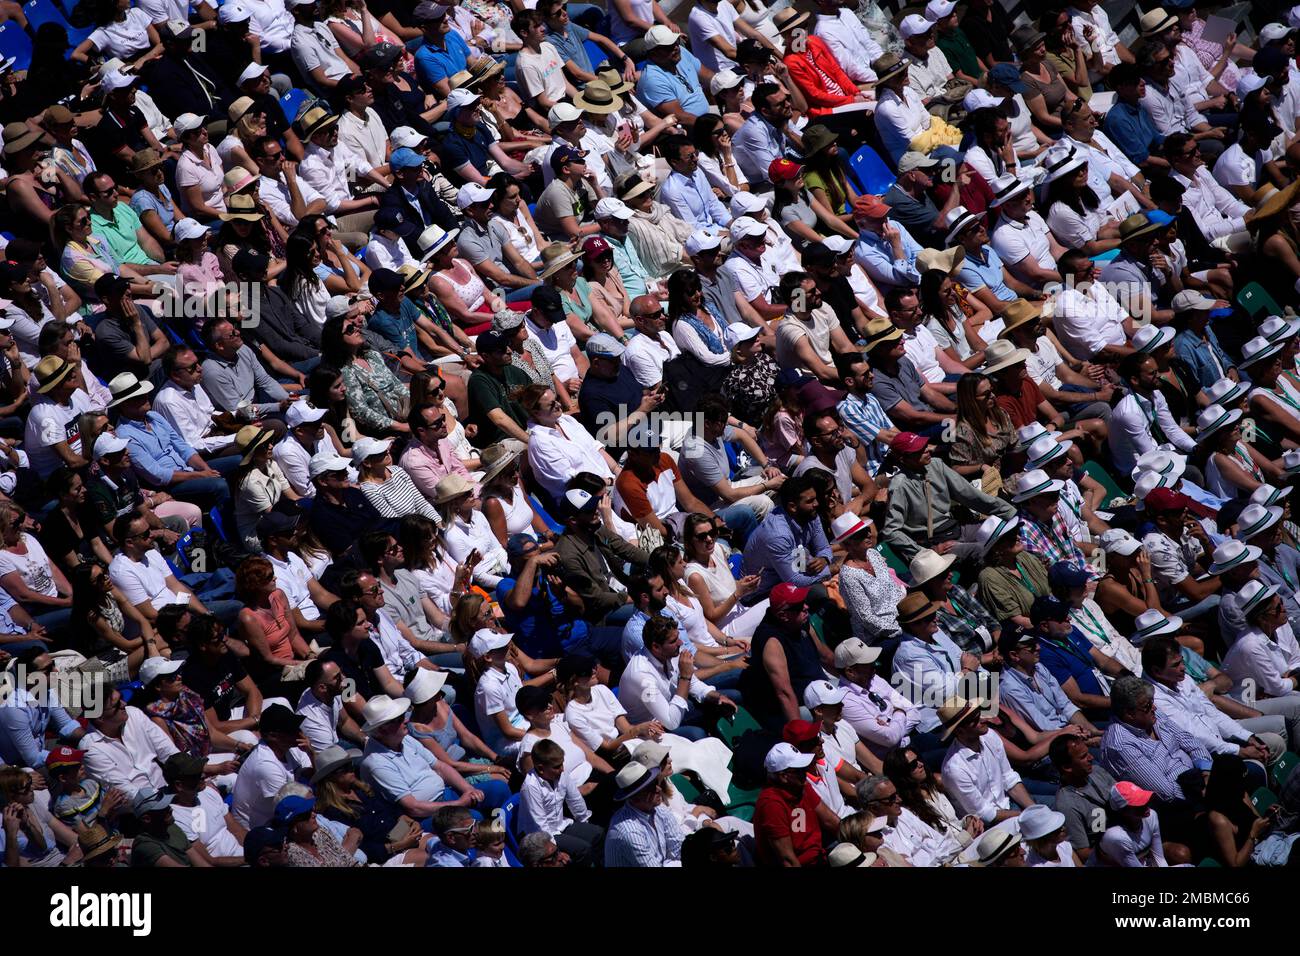 Spectators watch the final match of the Monte-Carlo Masters tennis tournament between Greeces Stefanos Tsitsipas and Spains Alejandro Davidovich Fokina, Sunday, April 17, 2022 in Monaco